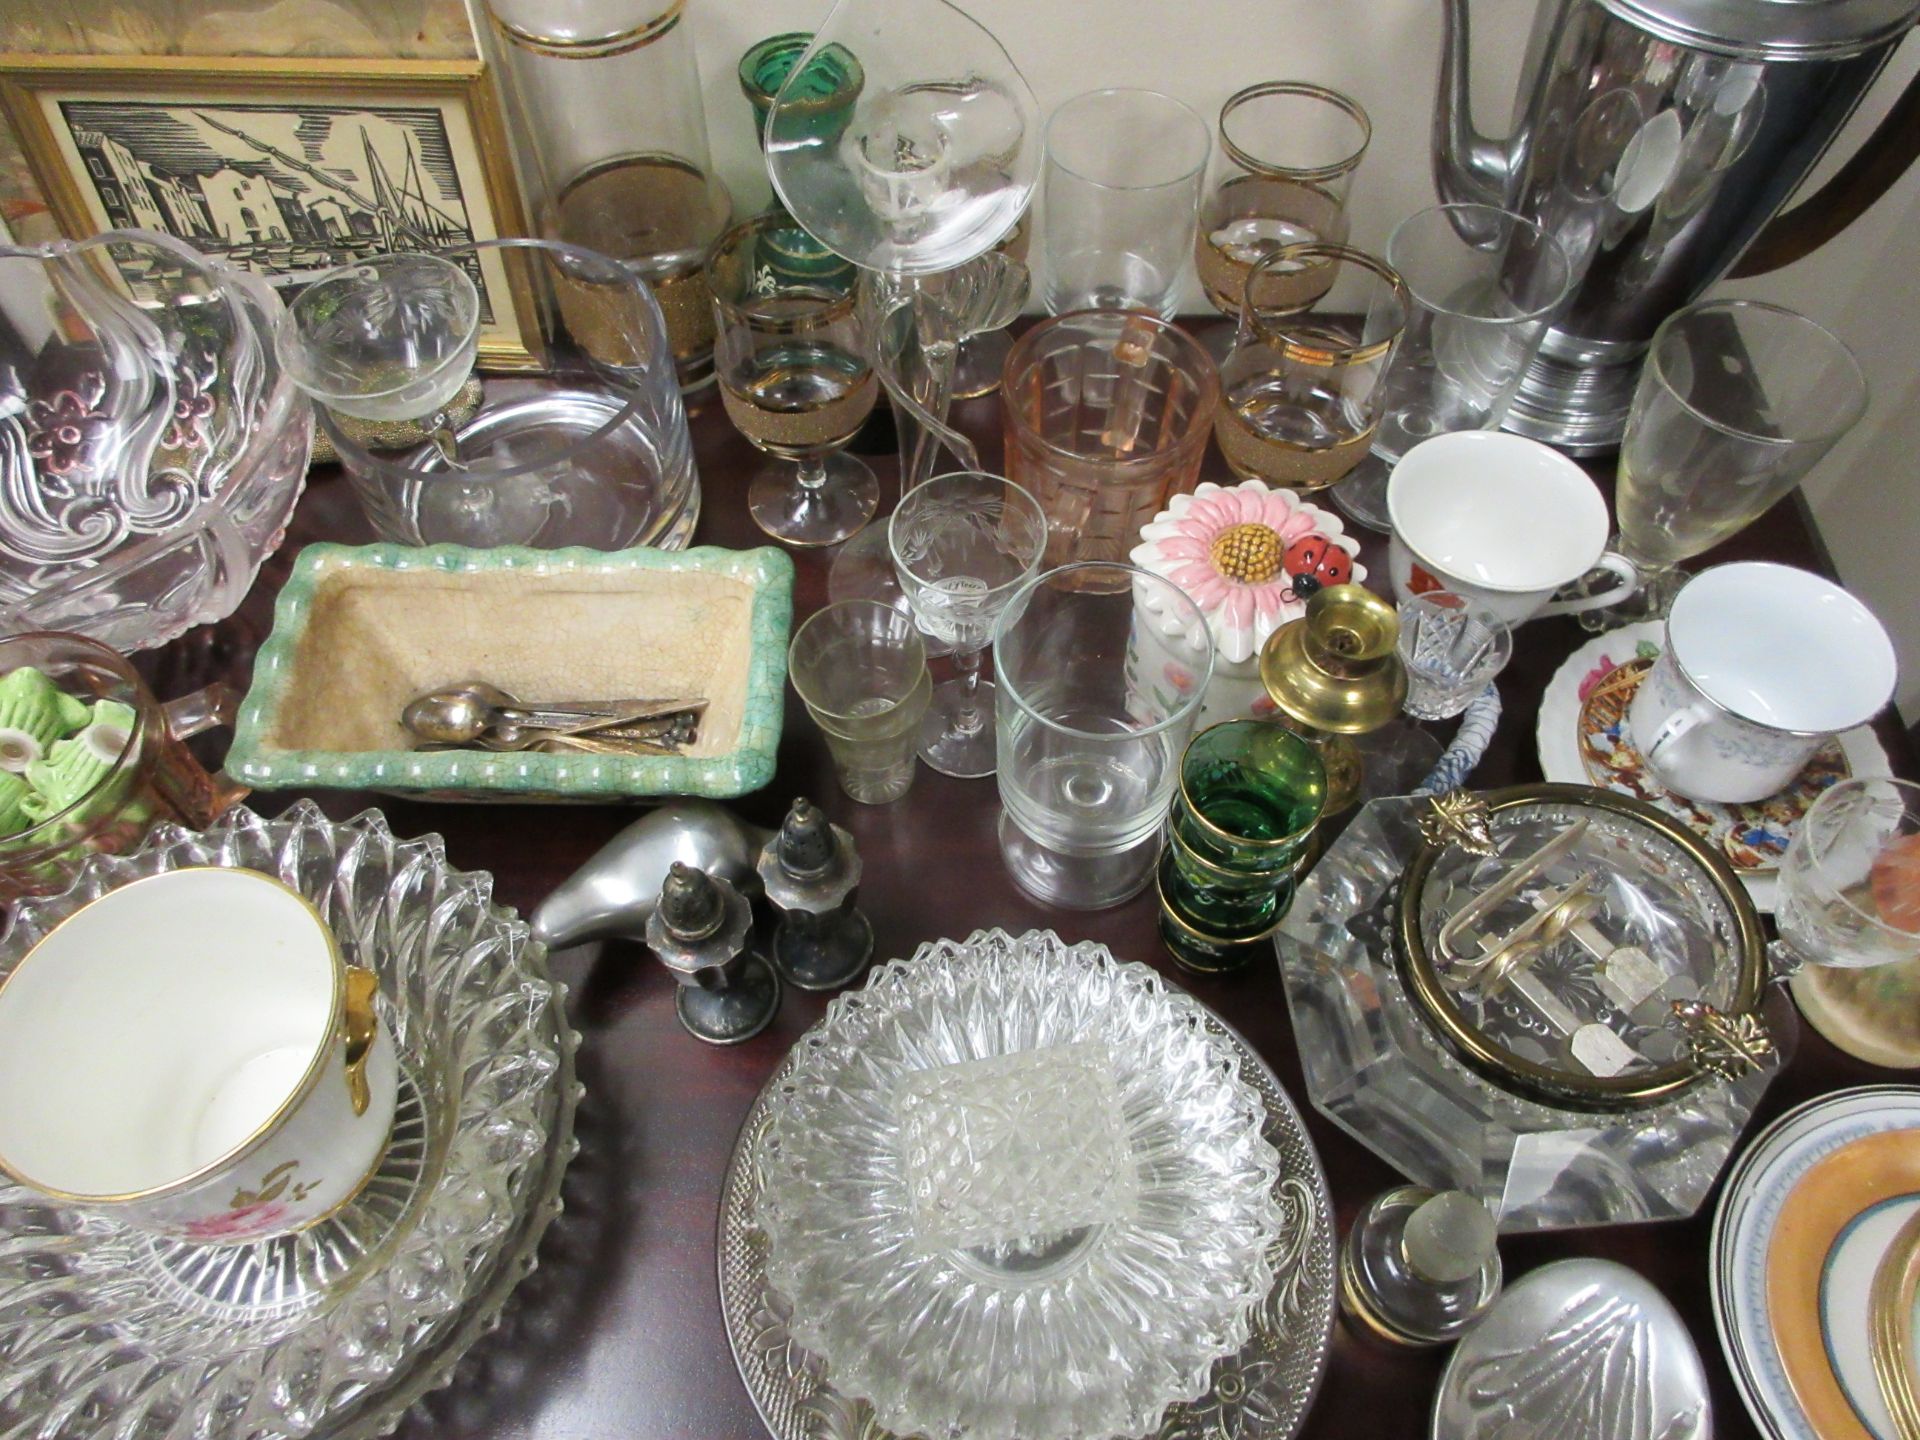 LOT OF ASSORTED ANTIQUE GLASSES,VASES,COLLECTORS DISHWARE, ETC. (60 PIECES) LOCATION : MONTREAL,QC. - Image 2 of 3